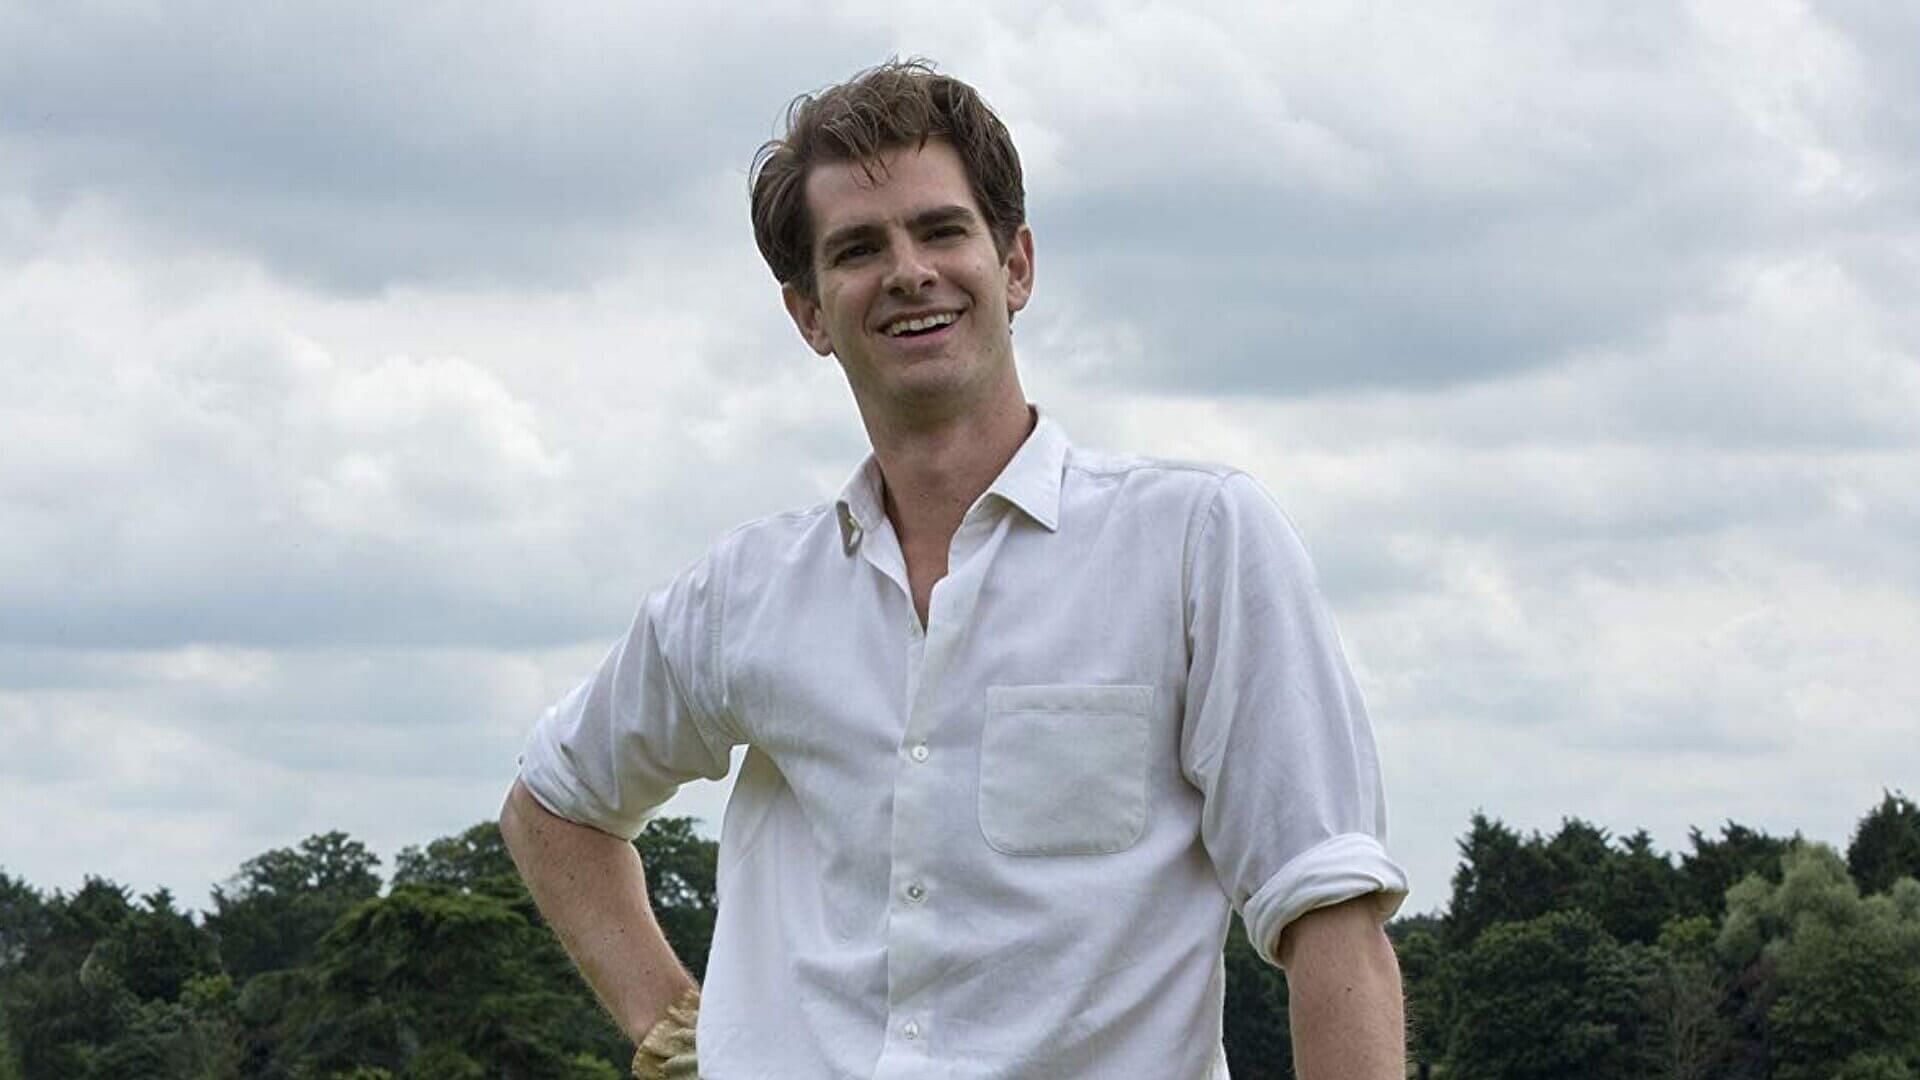 Andrew Garfield in Under the Banner of Heaven (Image via FX on Hulu)